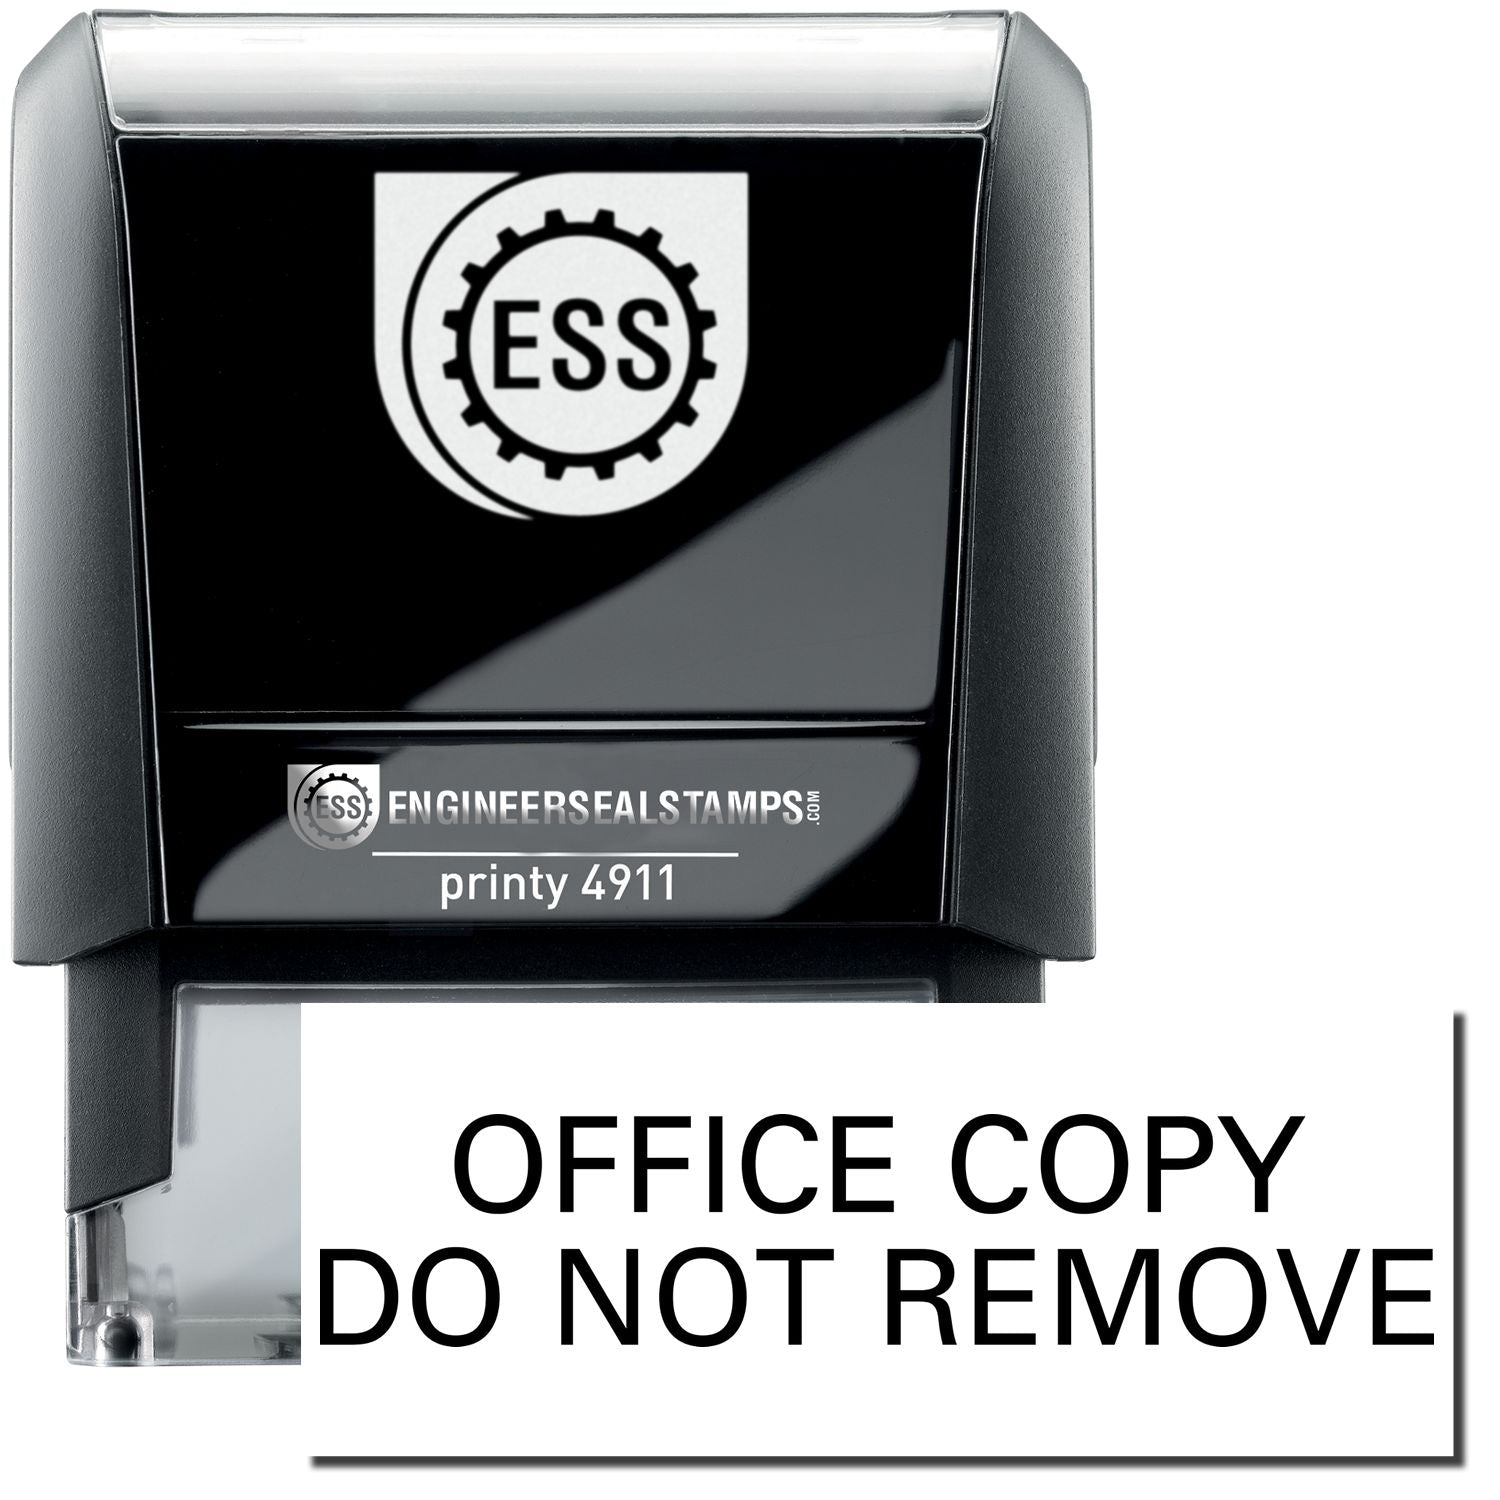 A self-inking stamp with a stamped image showing how the text "OFFICE COPY DO NOT REMOVE" is displayed after stamping.